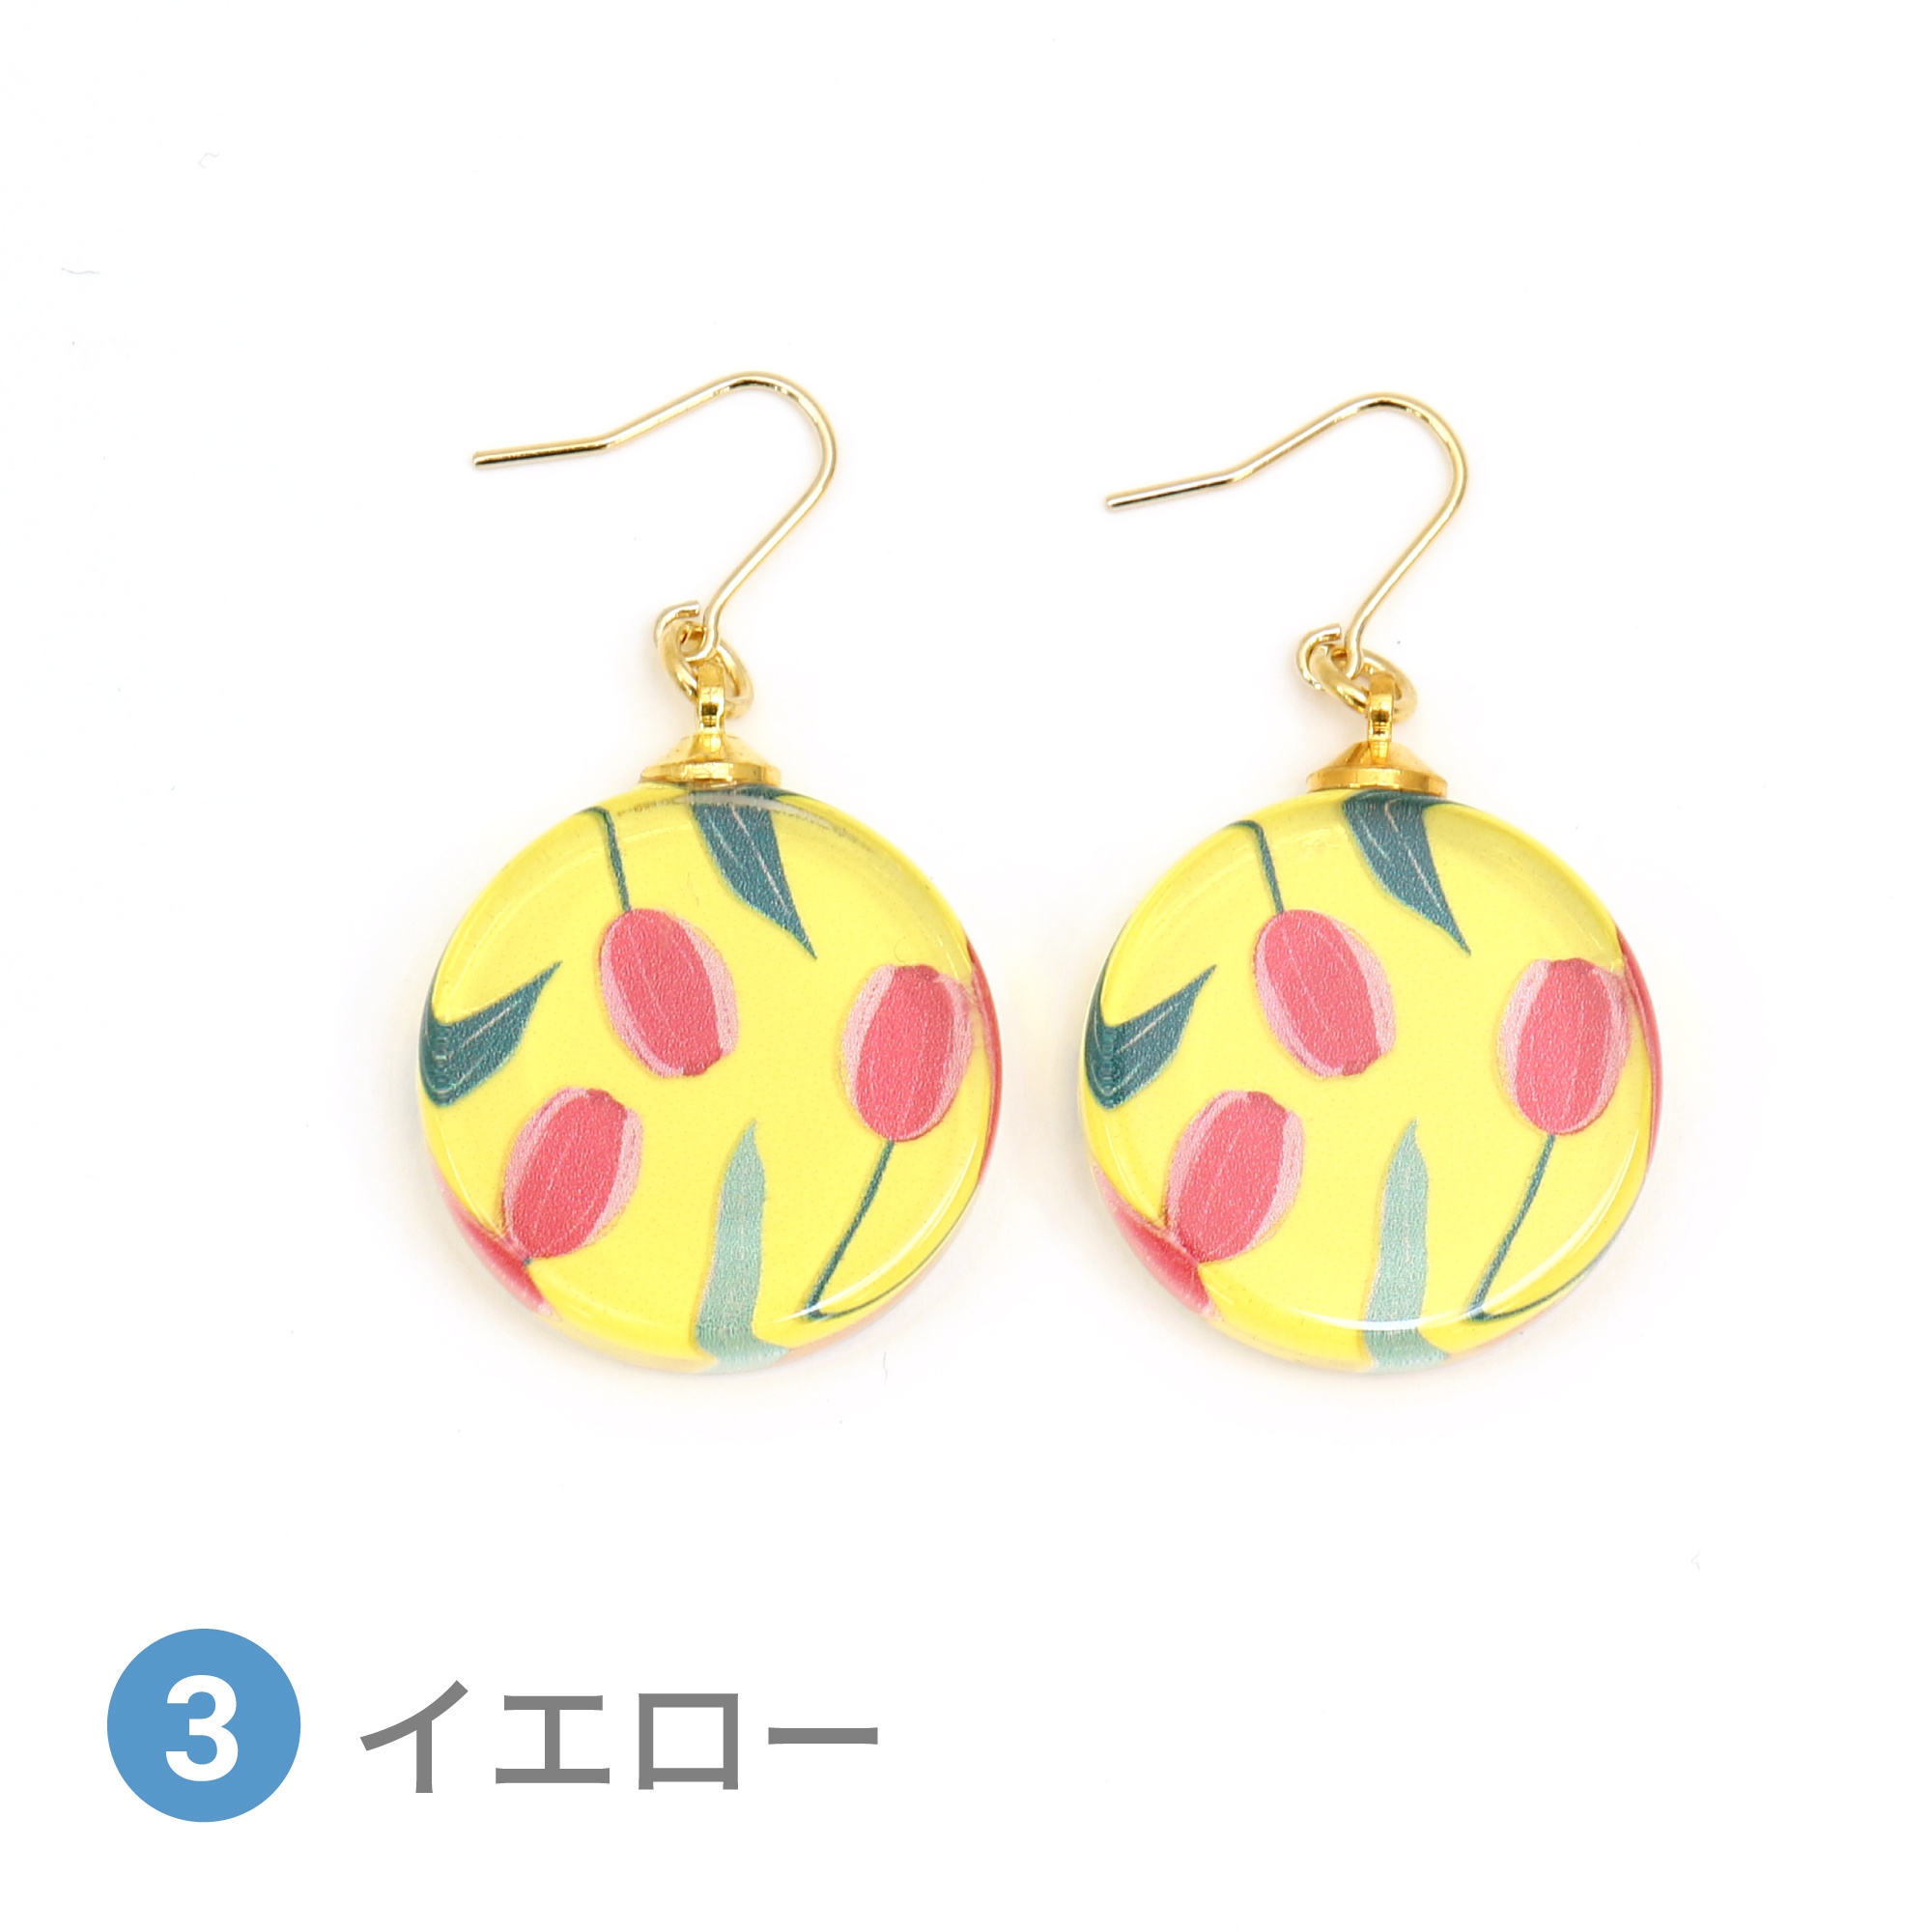 Glass accessories Pierced Earring TULIP yellow round shape